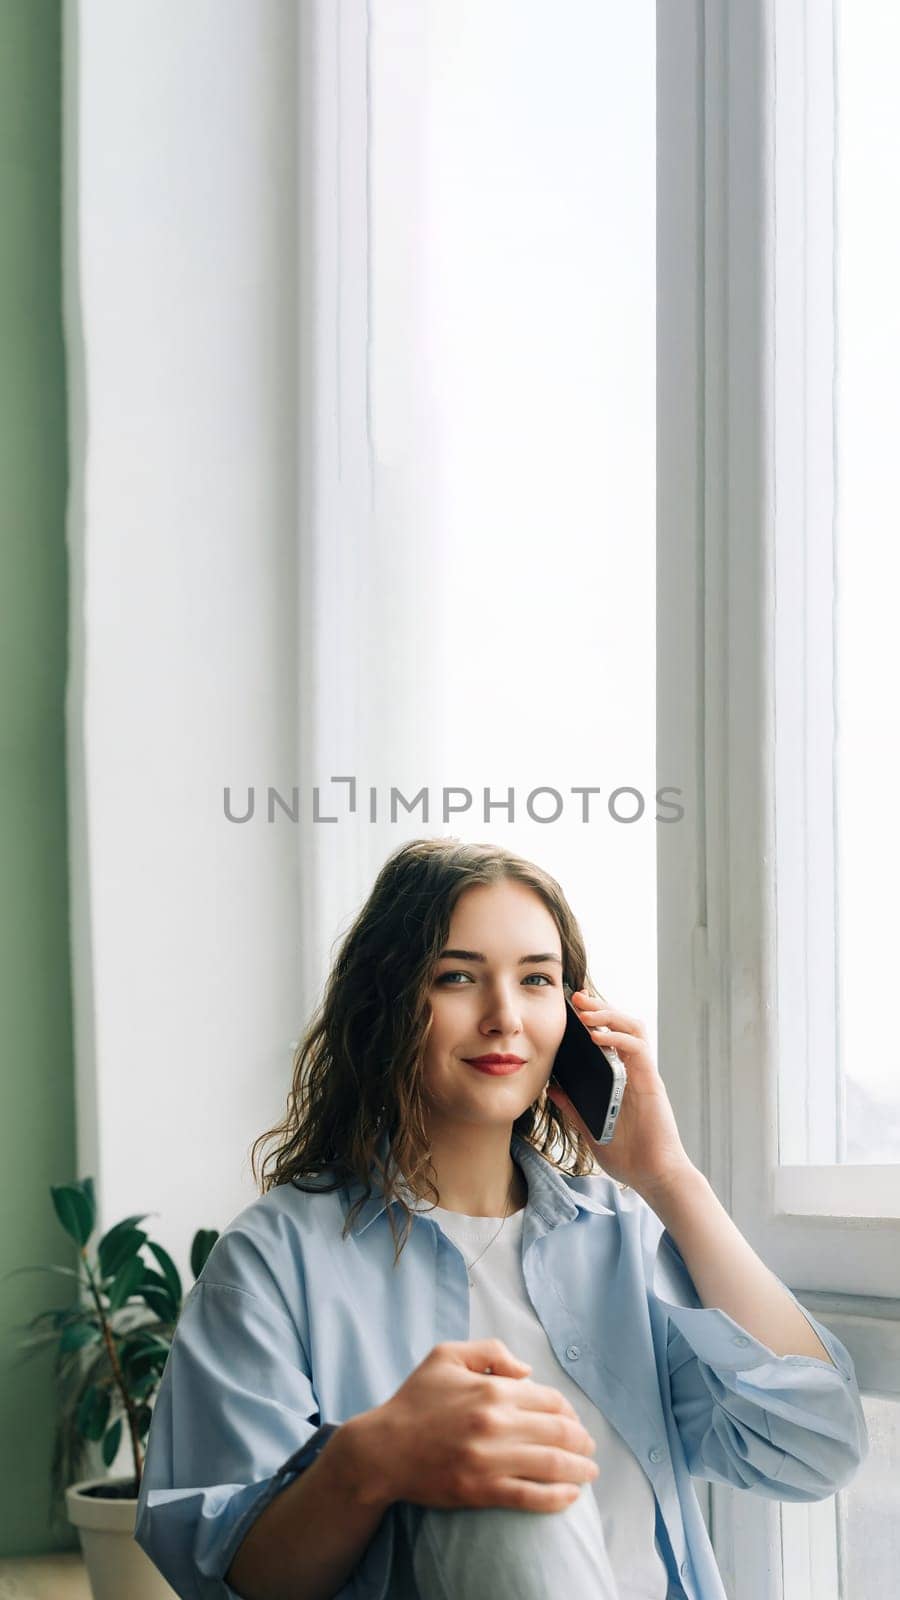 A busy but happy mom enjoying a phone call with her best friend while kids play in the background. Casual indoor lifestyle portrait of a charming 30s woman sitting on windowsill by ViShark